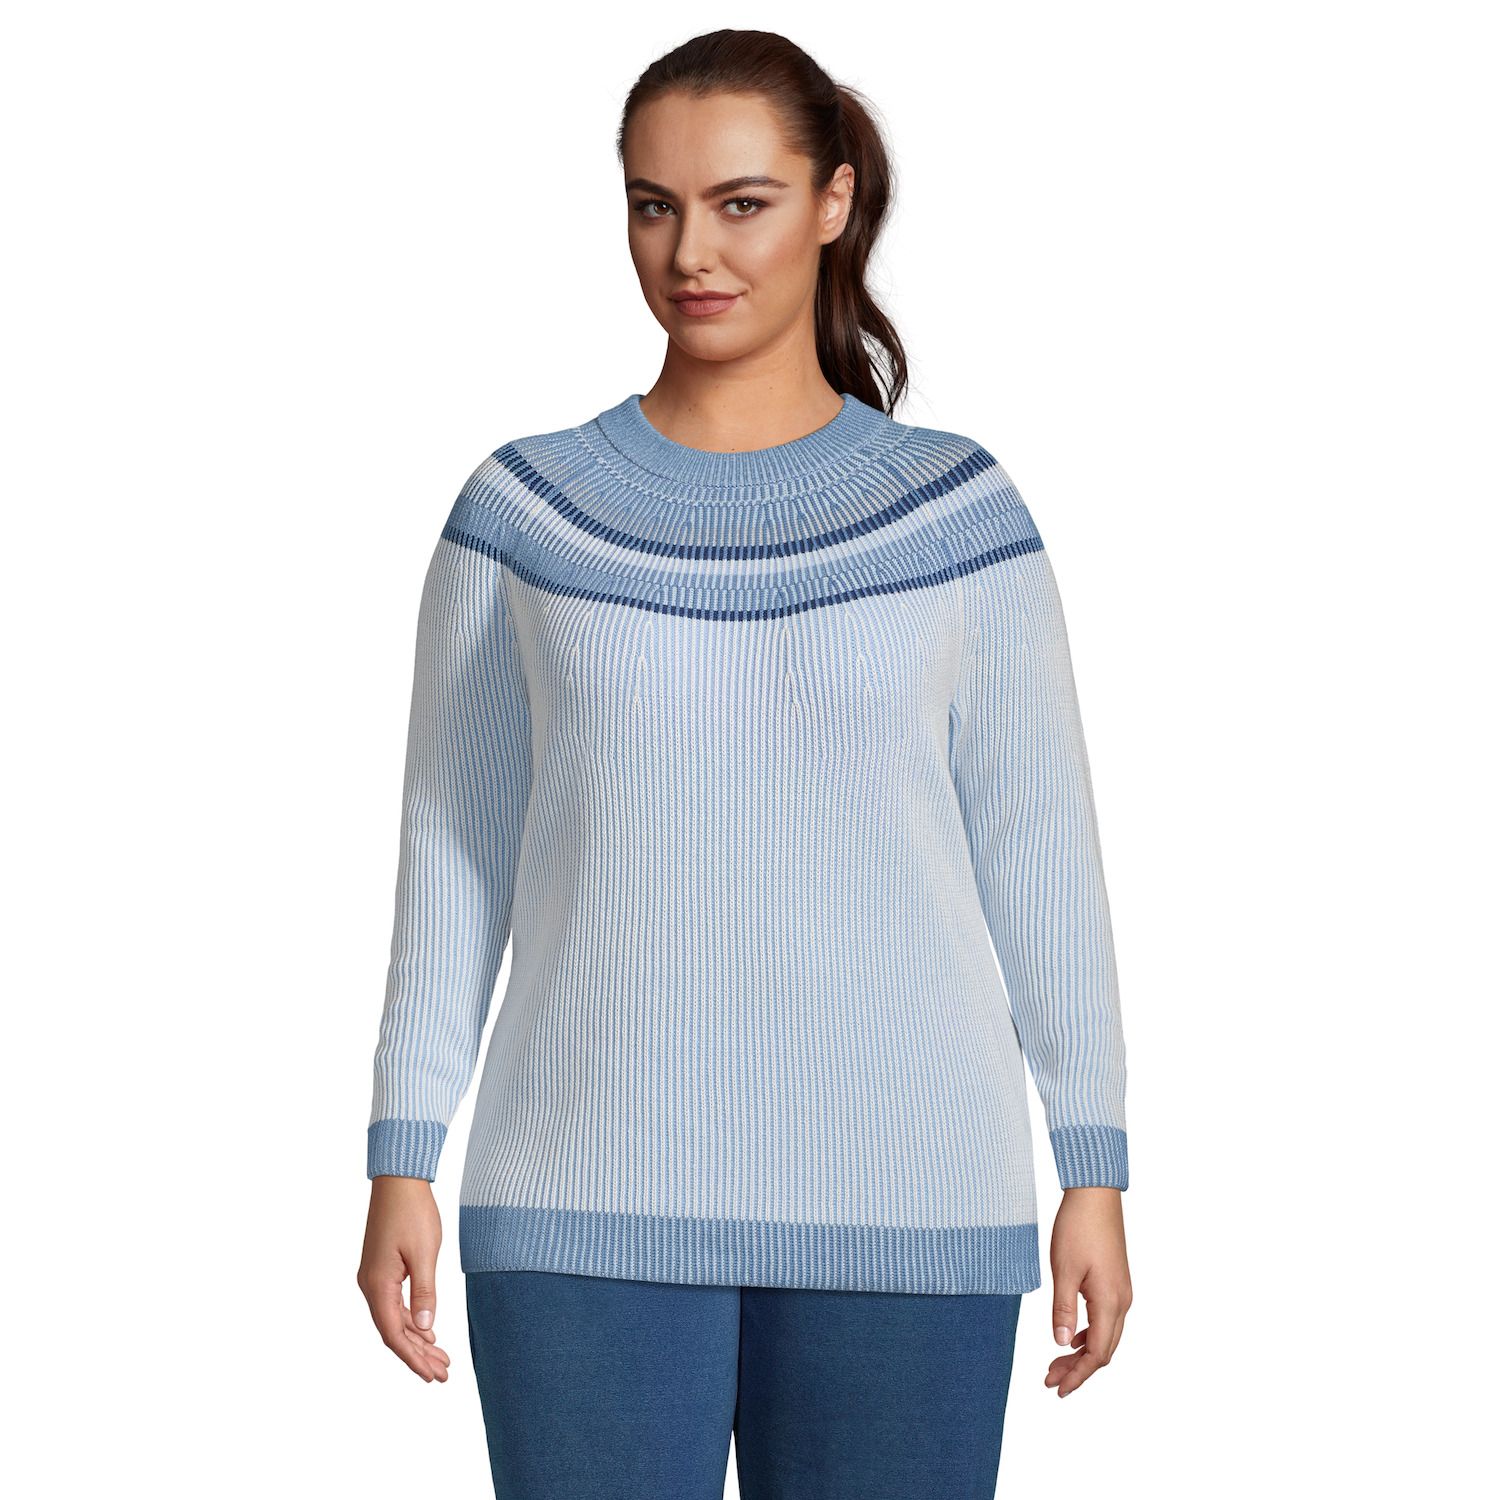 Image for Lands' End Plus Size Striped Yoke Cotton Drifter Shaker Doubled Crewneck Sweater at Kohl's.